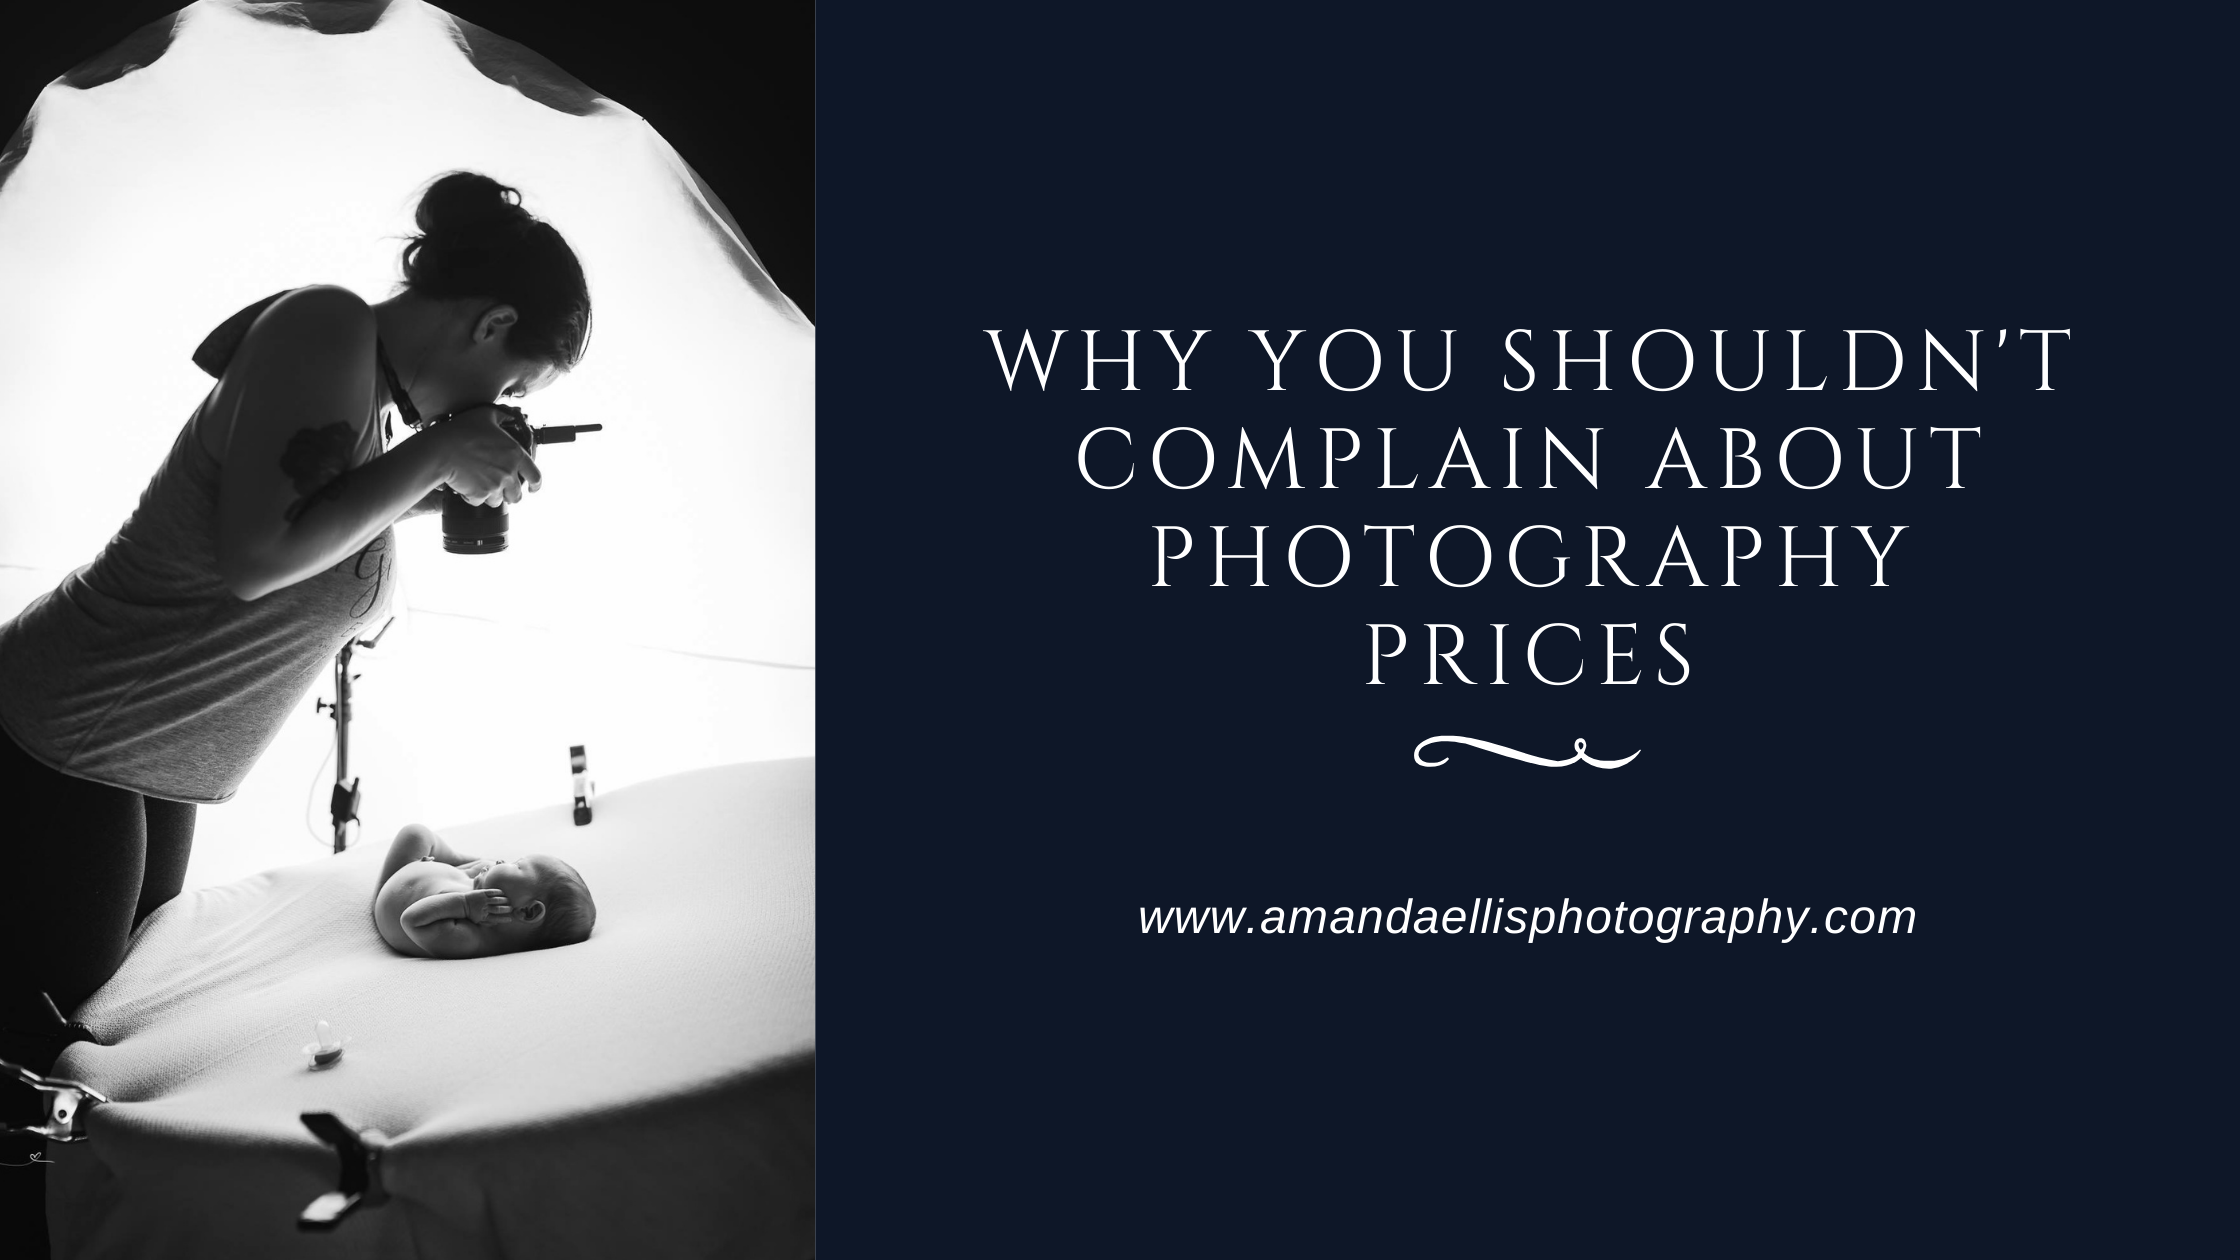 Why you shouldn't complain about photography prices